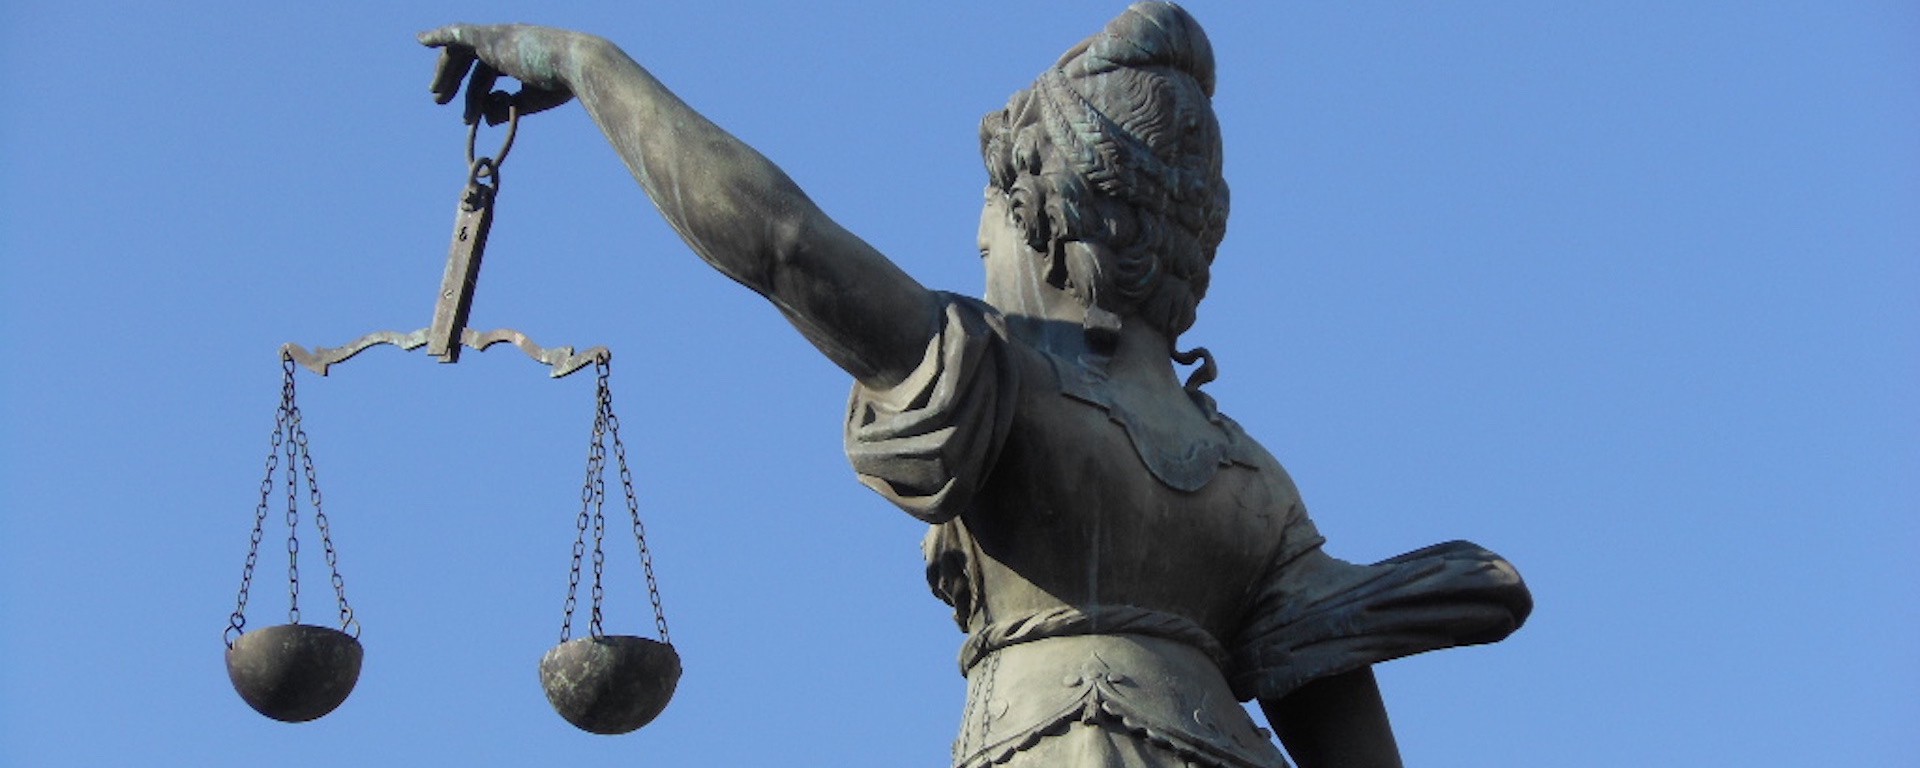 A statue of Lady Justice holding scales.